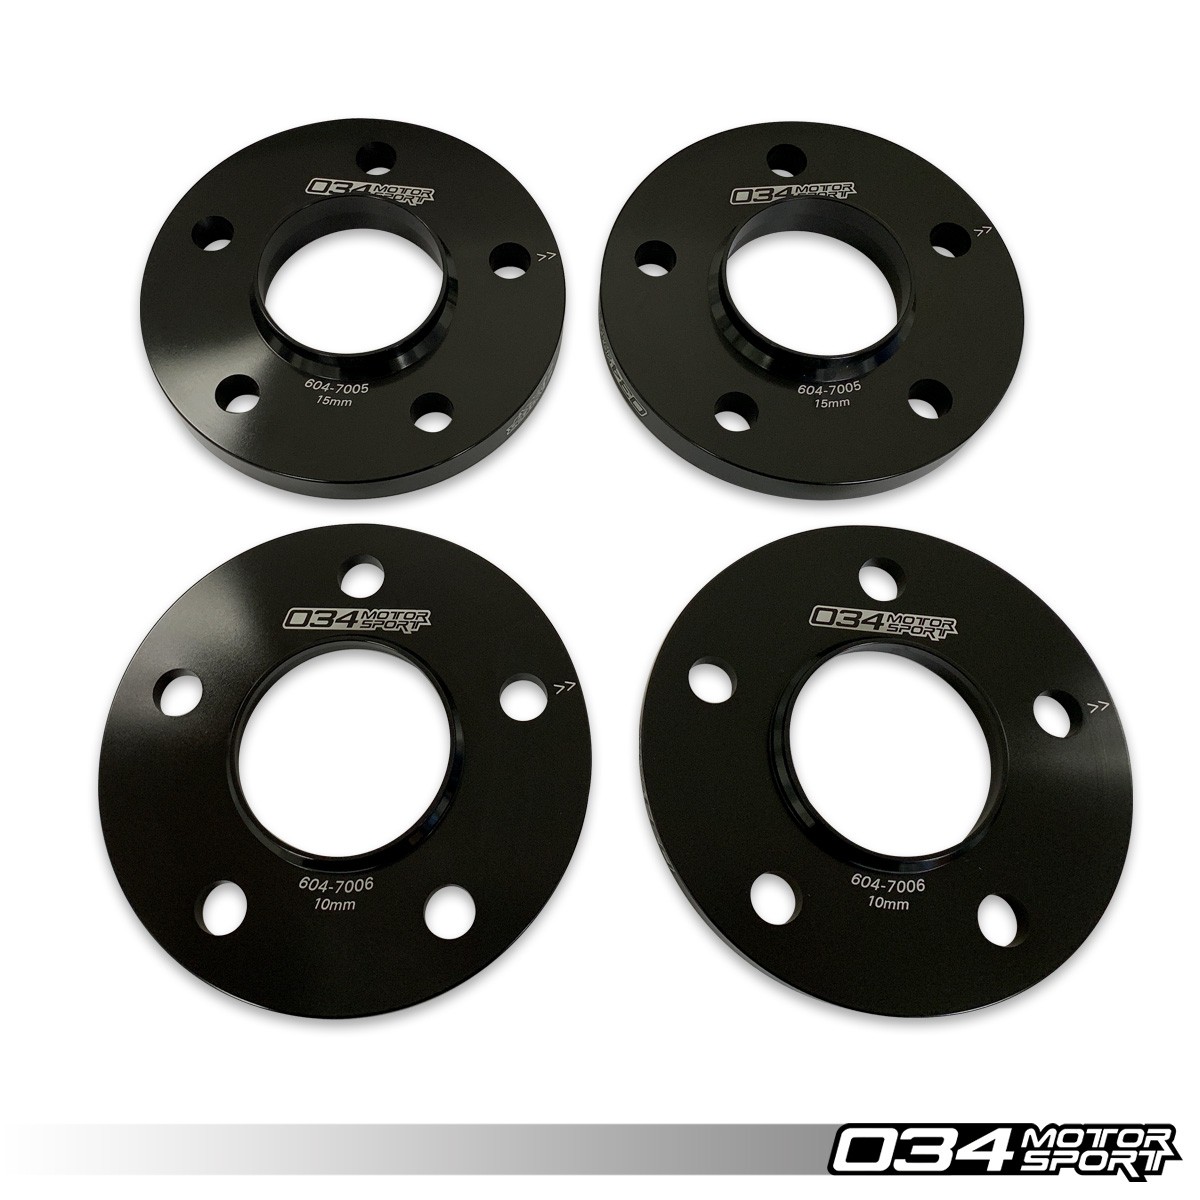 Wheel Spacers 15mm Hubcentric 1 Pair for Audi S6 C6 2004-2010